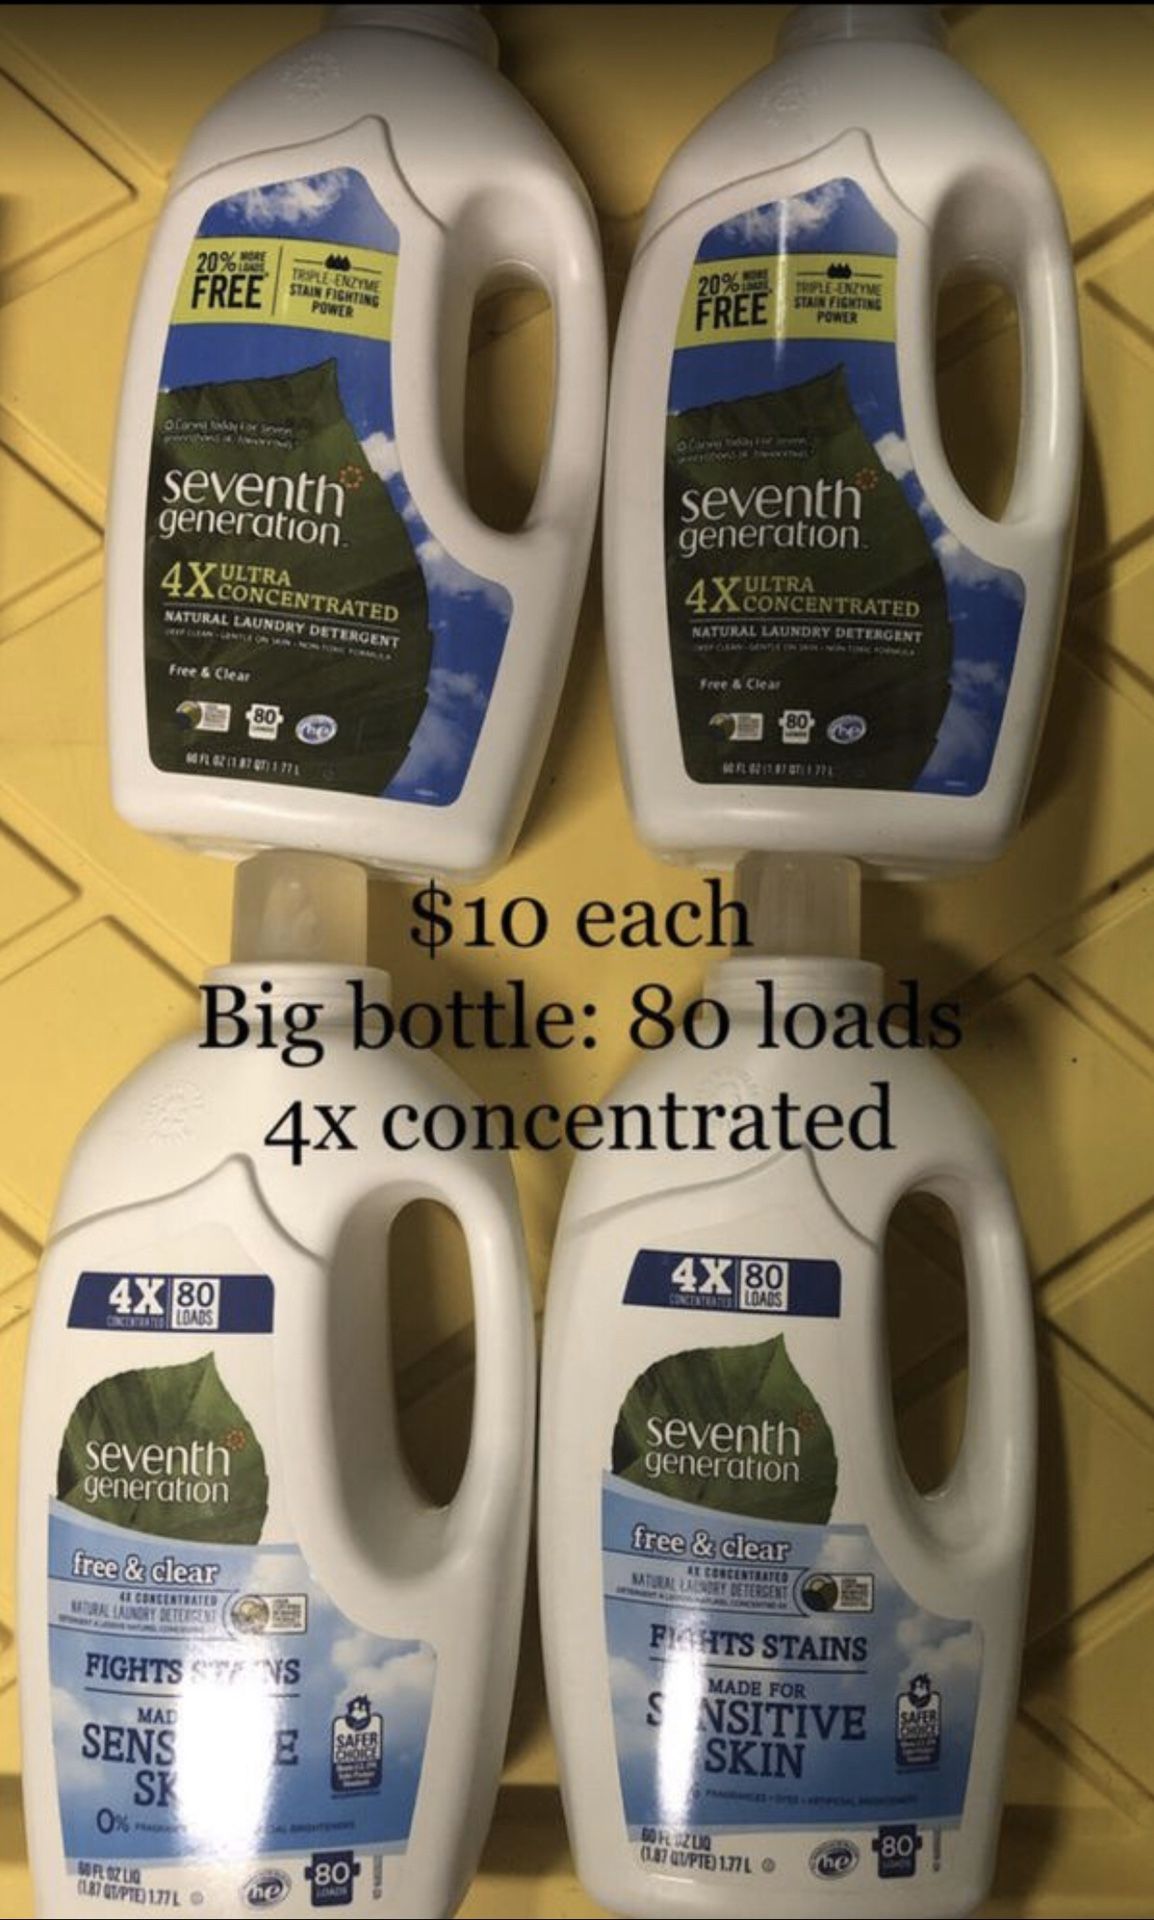 Seven Generation Natural Laundry Detergent -80 Loads- 4X Concentrated: $10 each